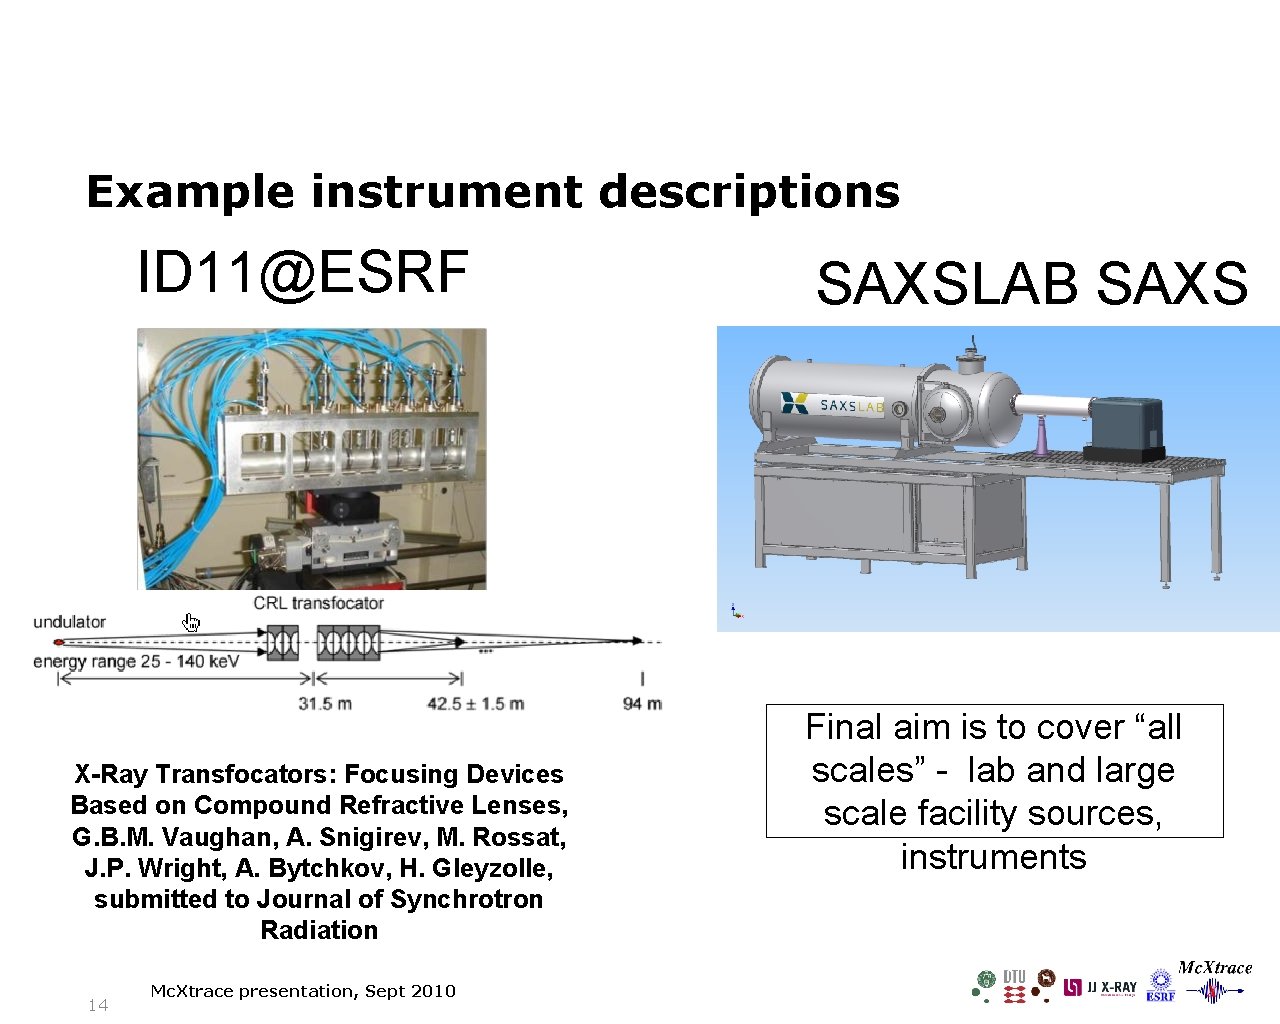 Example instrument descriptions ID 11@ESRF X-Ray Transfocators: Focusing Devices Based on Compound Refractive Lenses,